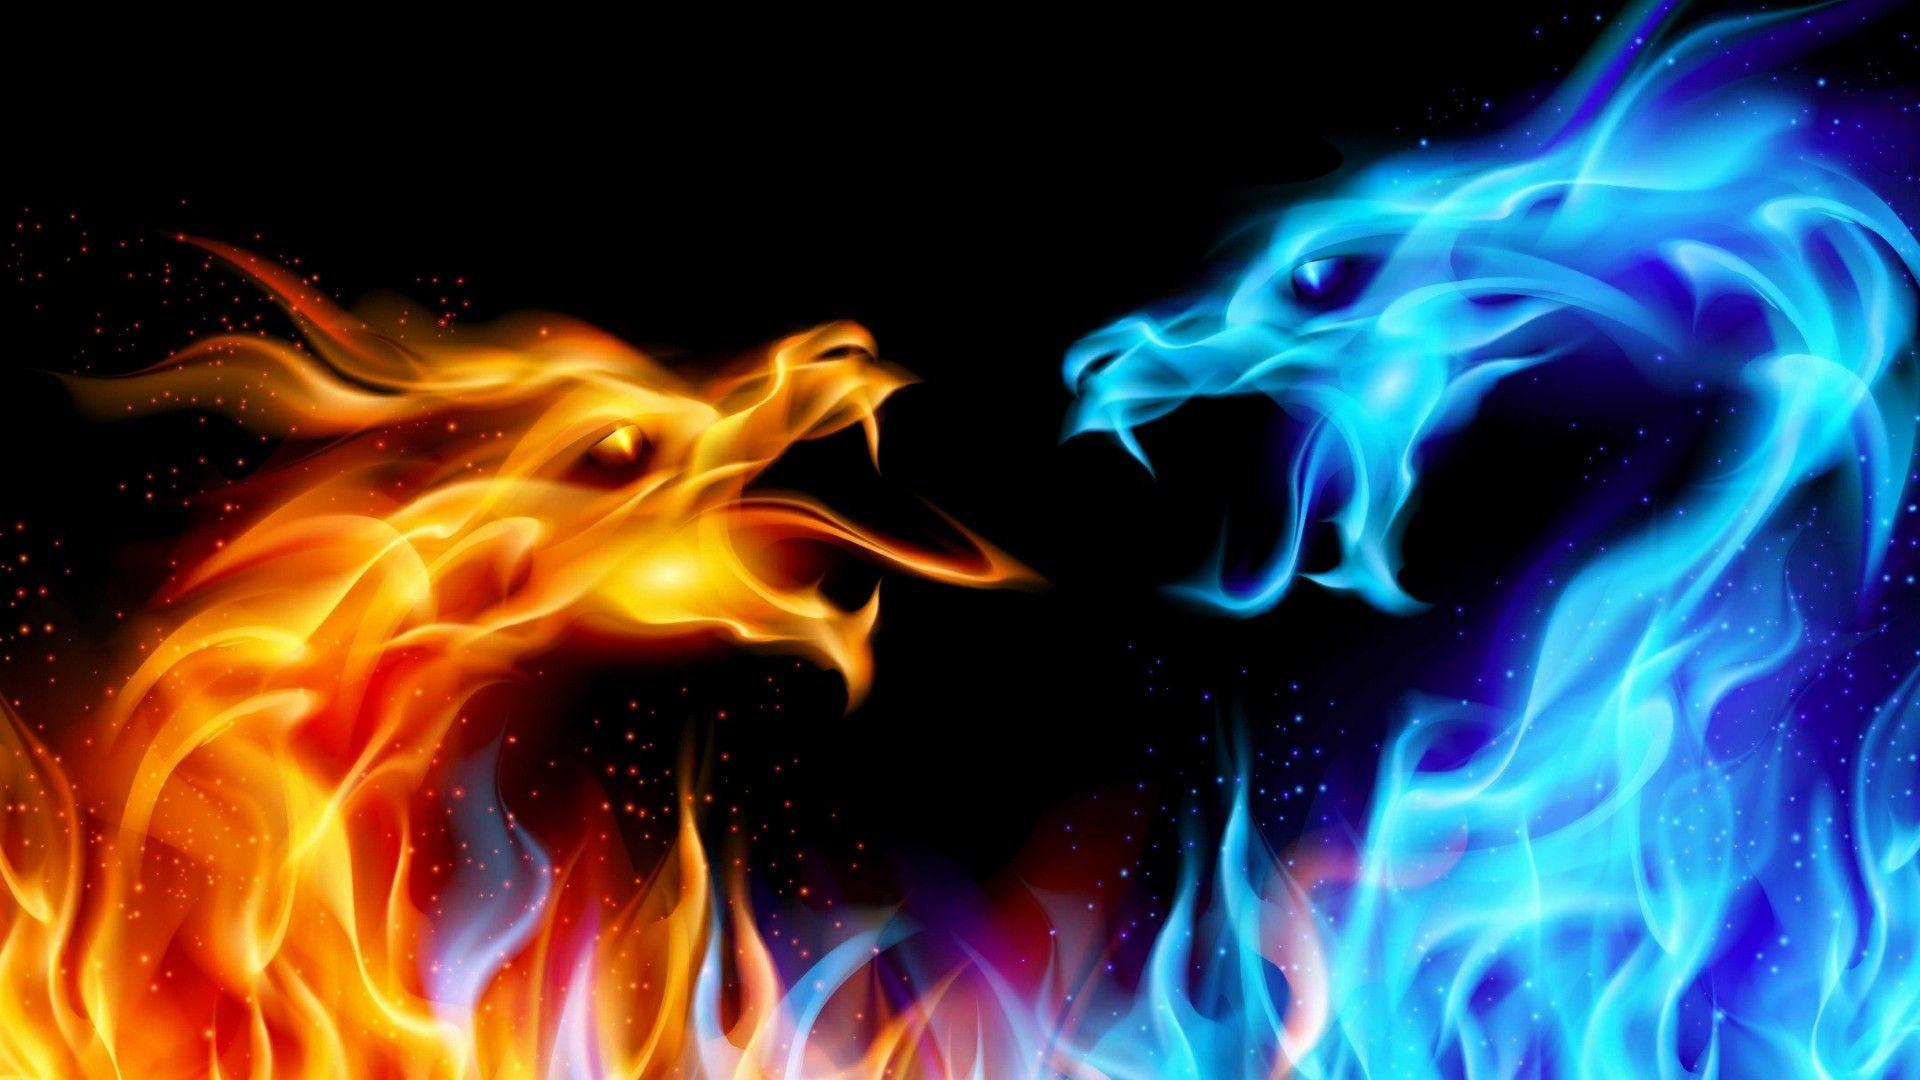 Fire and Ice Dragon Wallpapers - Top Free Fire and Ice ...